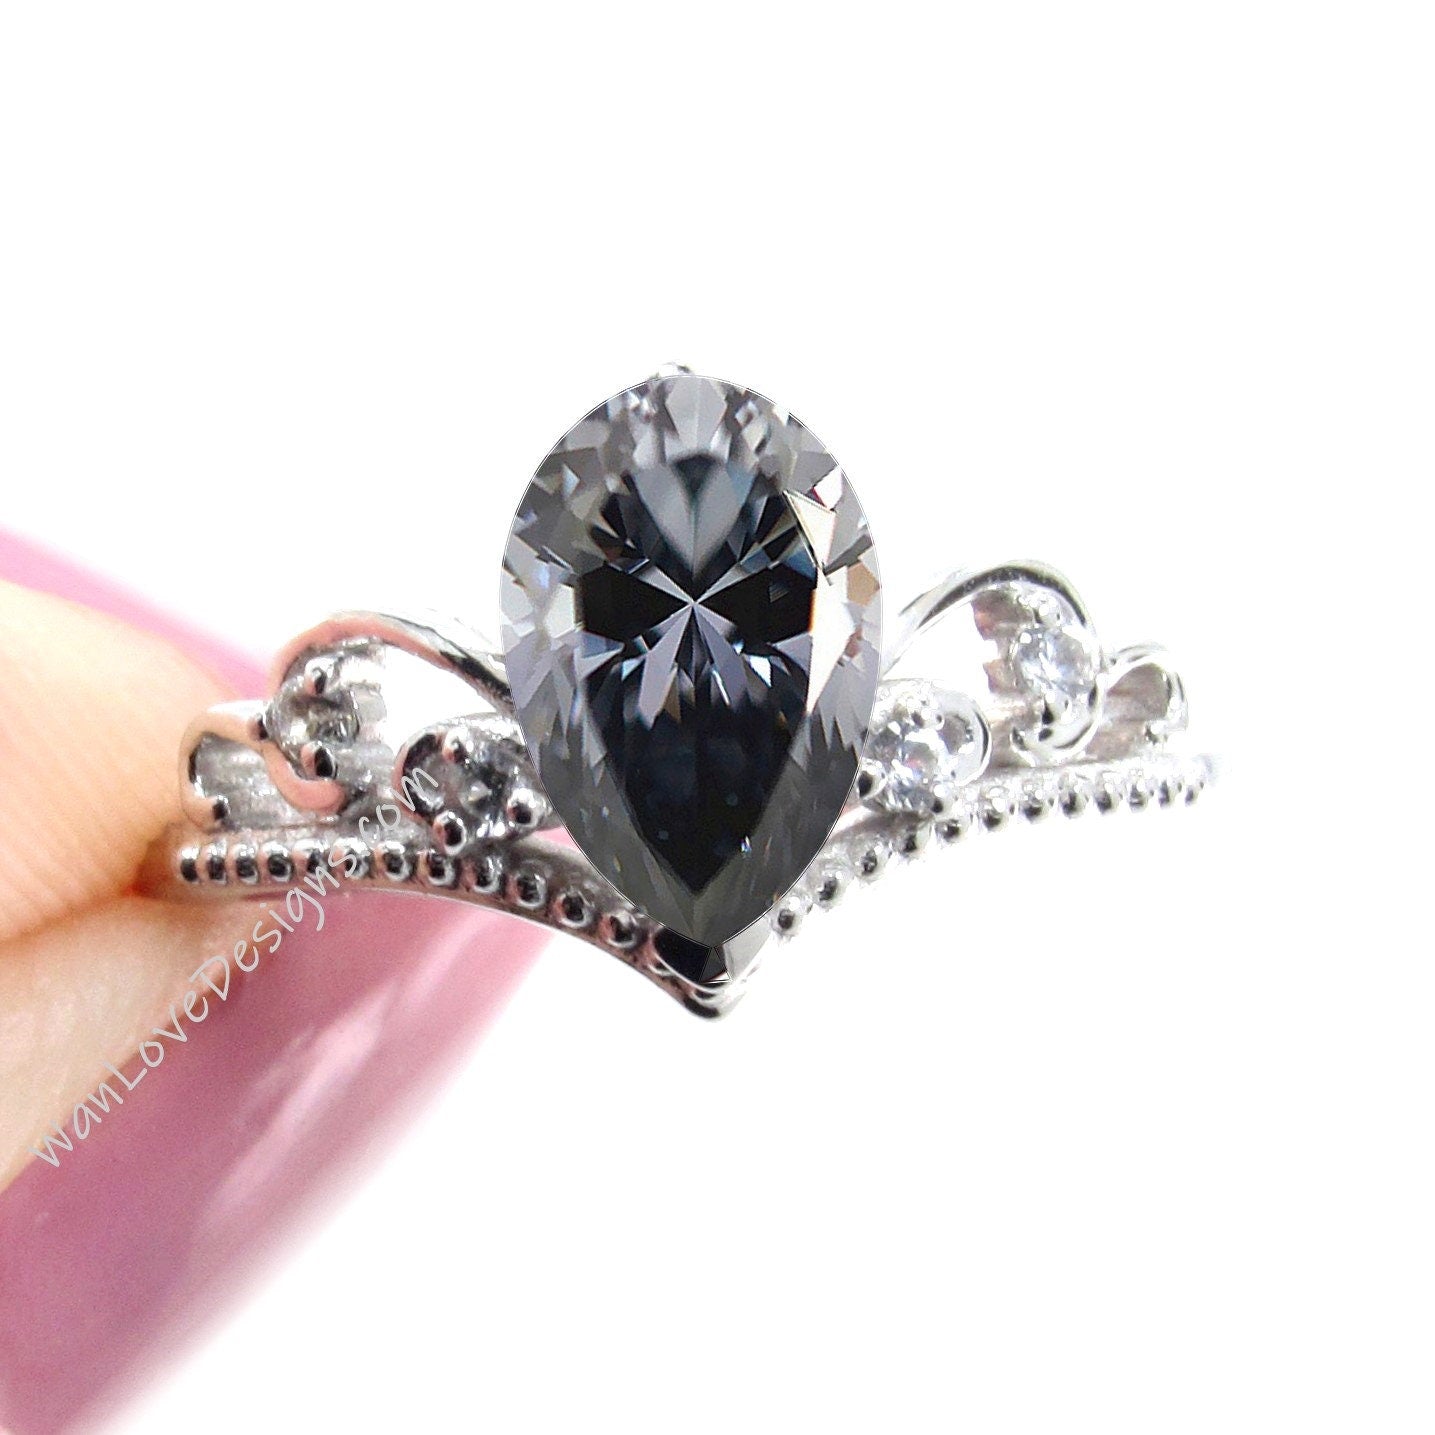 Vintage pear engagement ring| Grey moissanite v chevron wedding ring| Cluster Pear shaped filigree Bridal ring| Antique Anniversary ring WanLoveDesigns